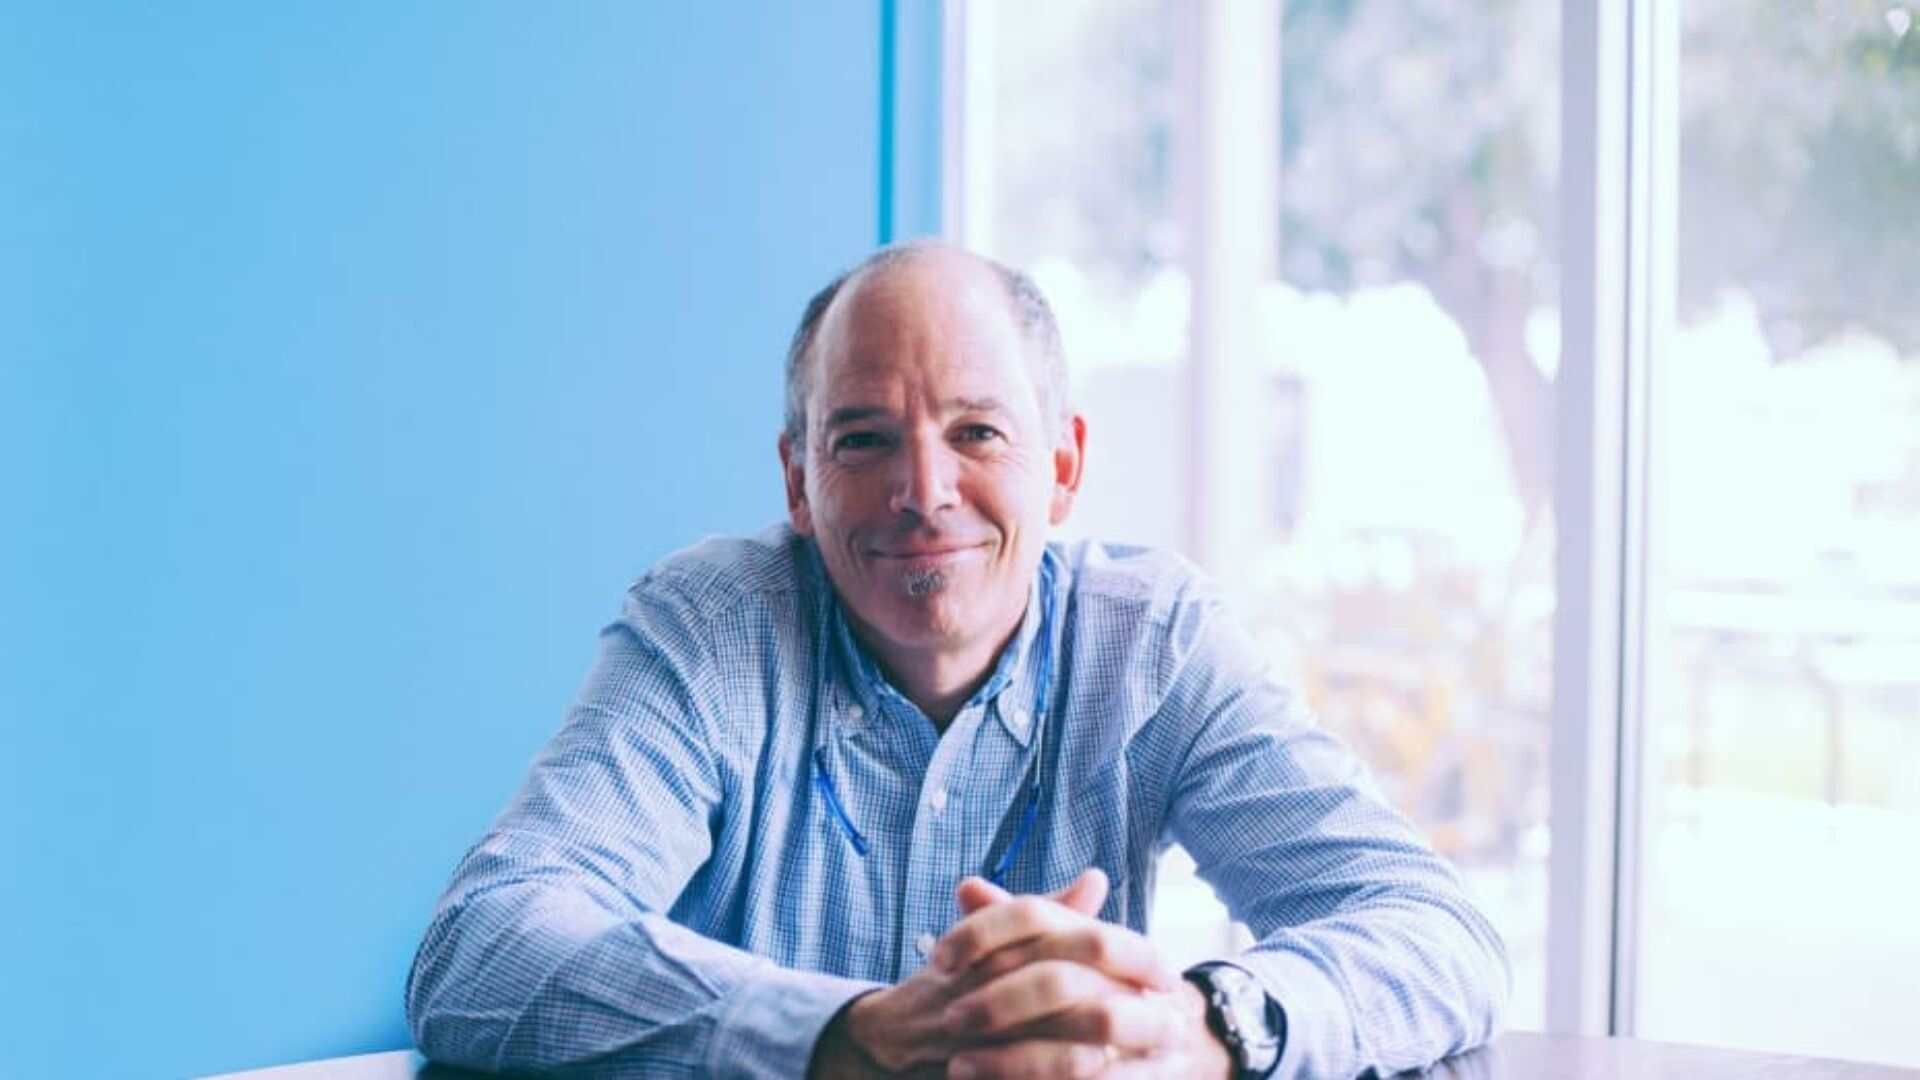 Netflix Co-founder Marc Randolph Shares Father’s Timeless Success Tips, Viral Post